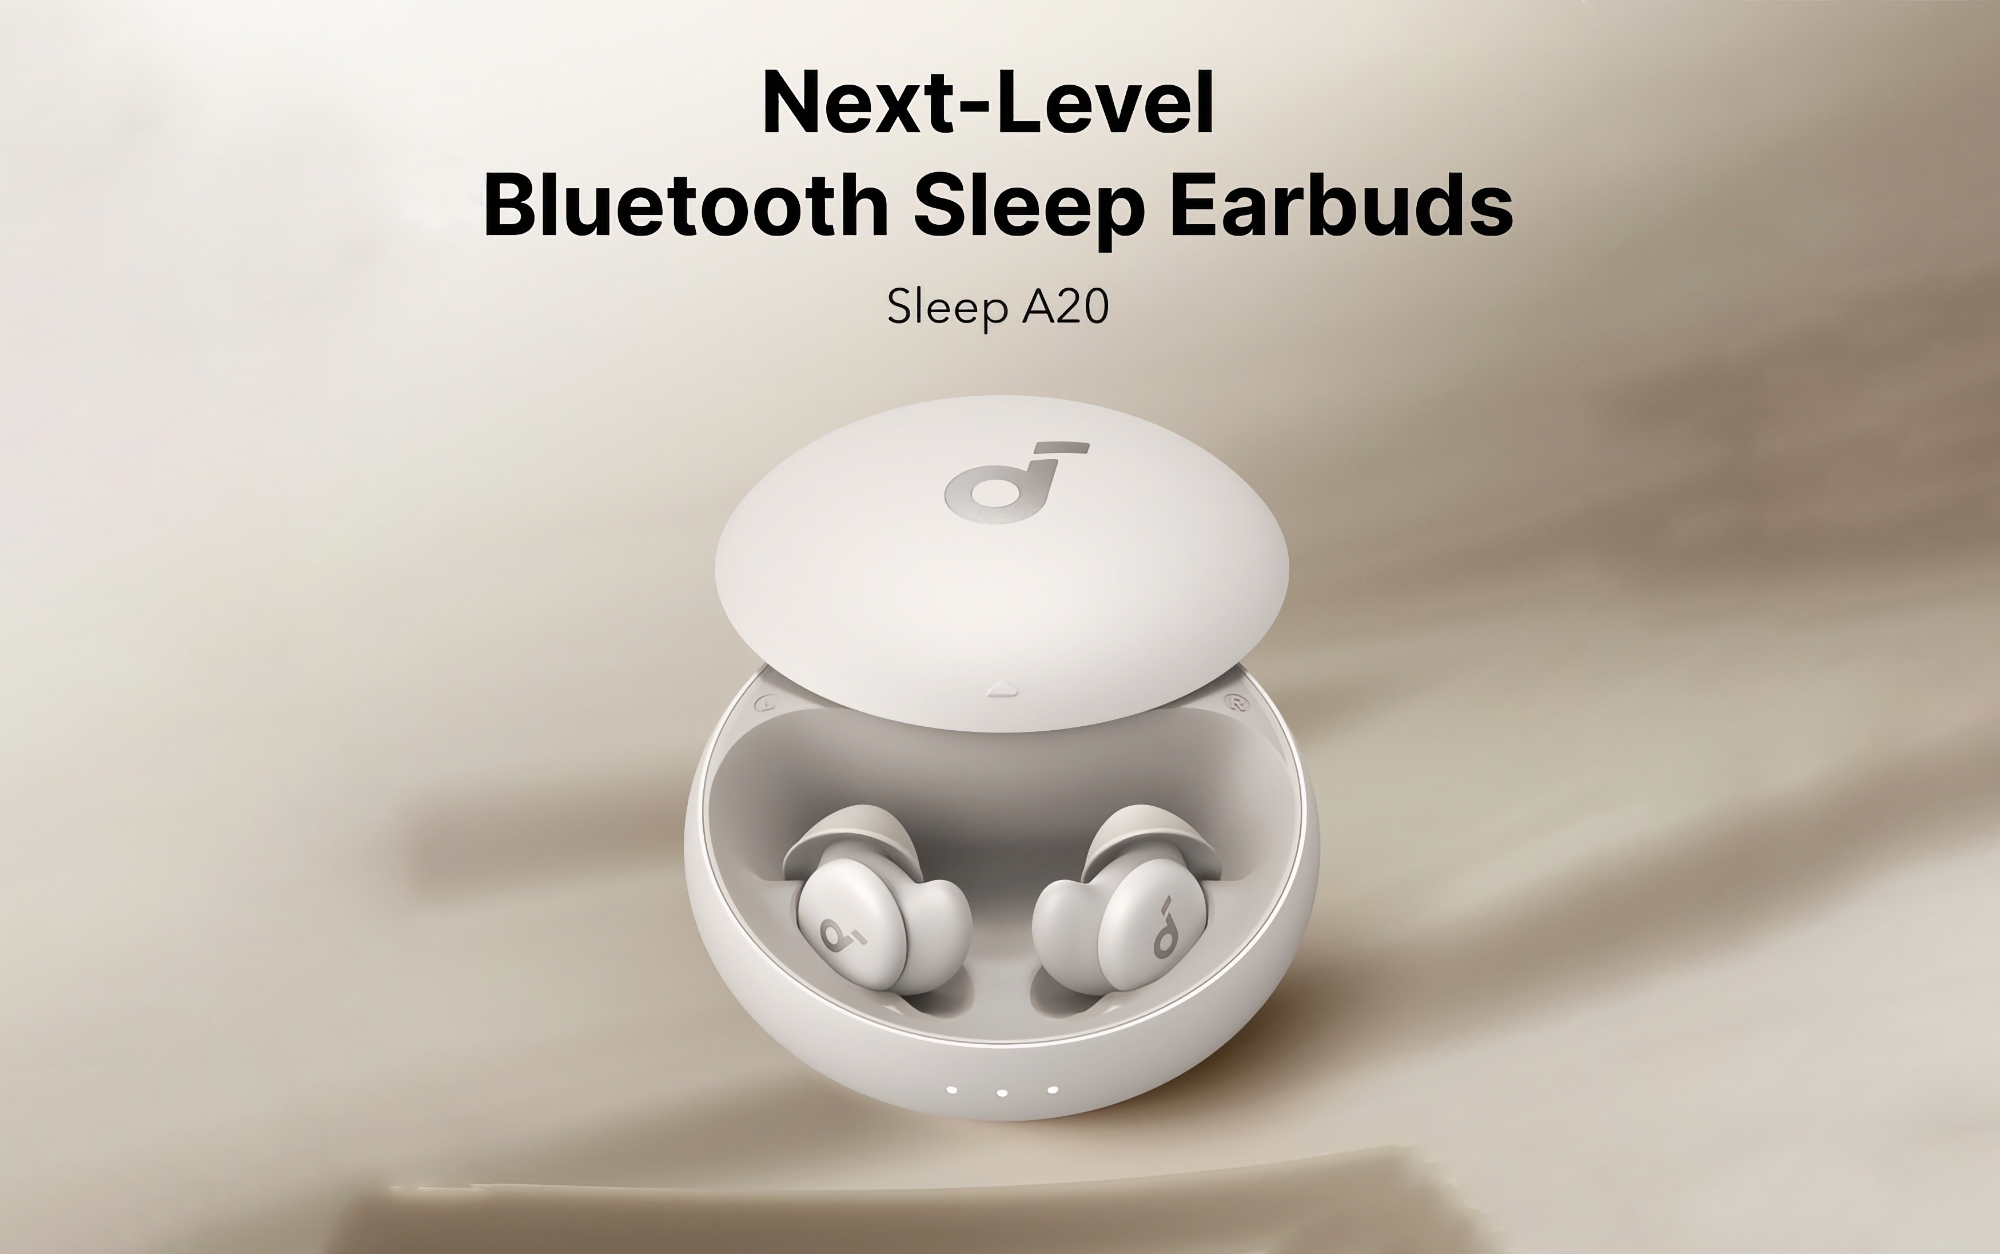 Anker Soundcore Sleep A20 on Kickstarter: TWS sleep headphones with ANC and up to 80 hours of battery life for $104.